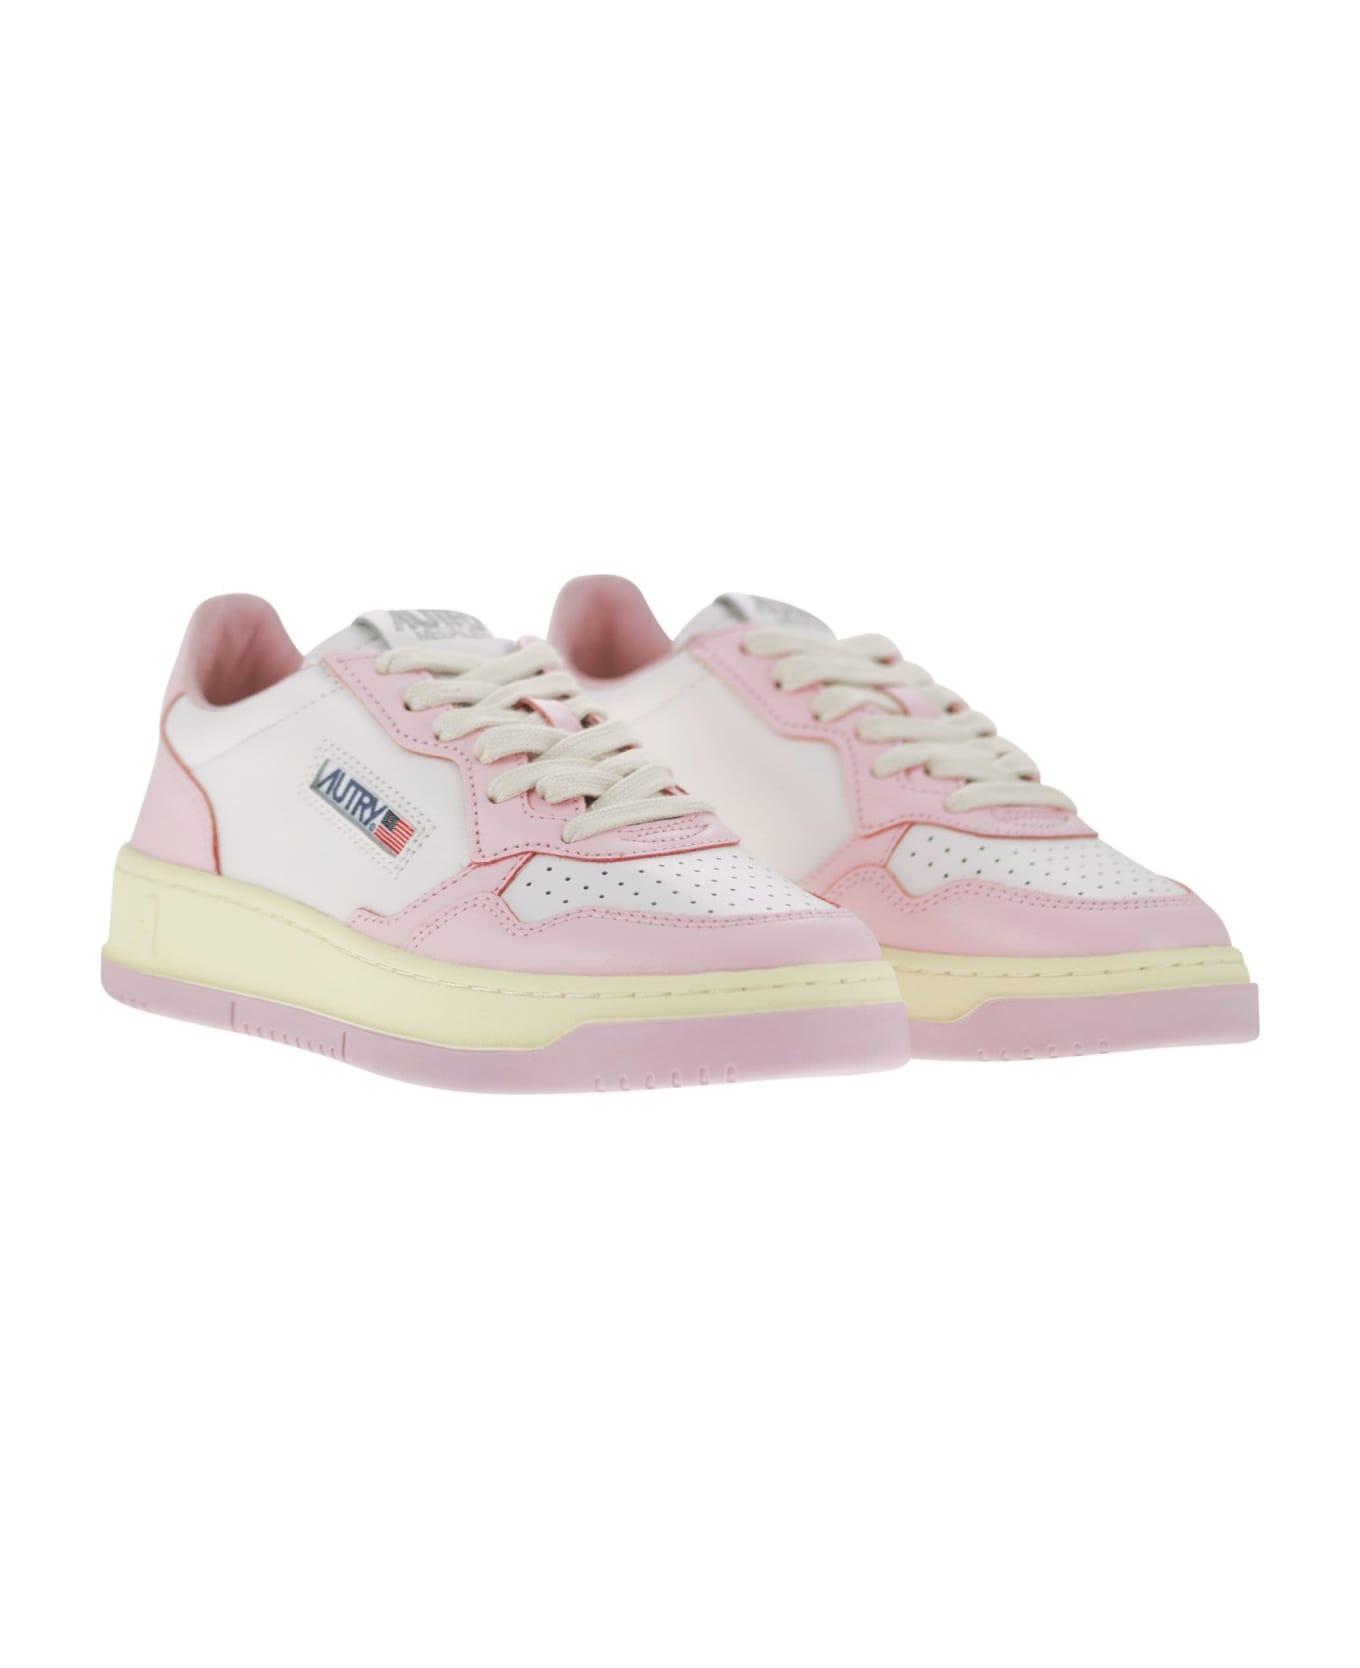 Autry Medalist Low Leather Sneakers - White/pink スニーカー